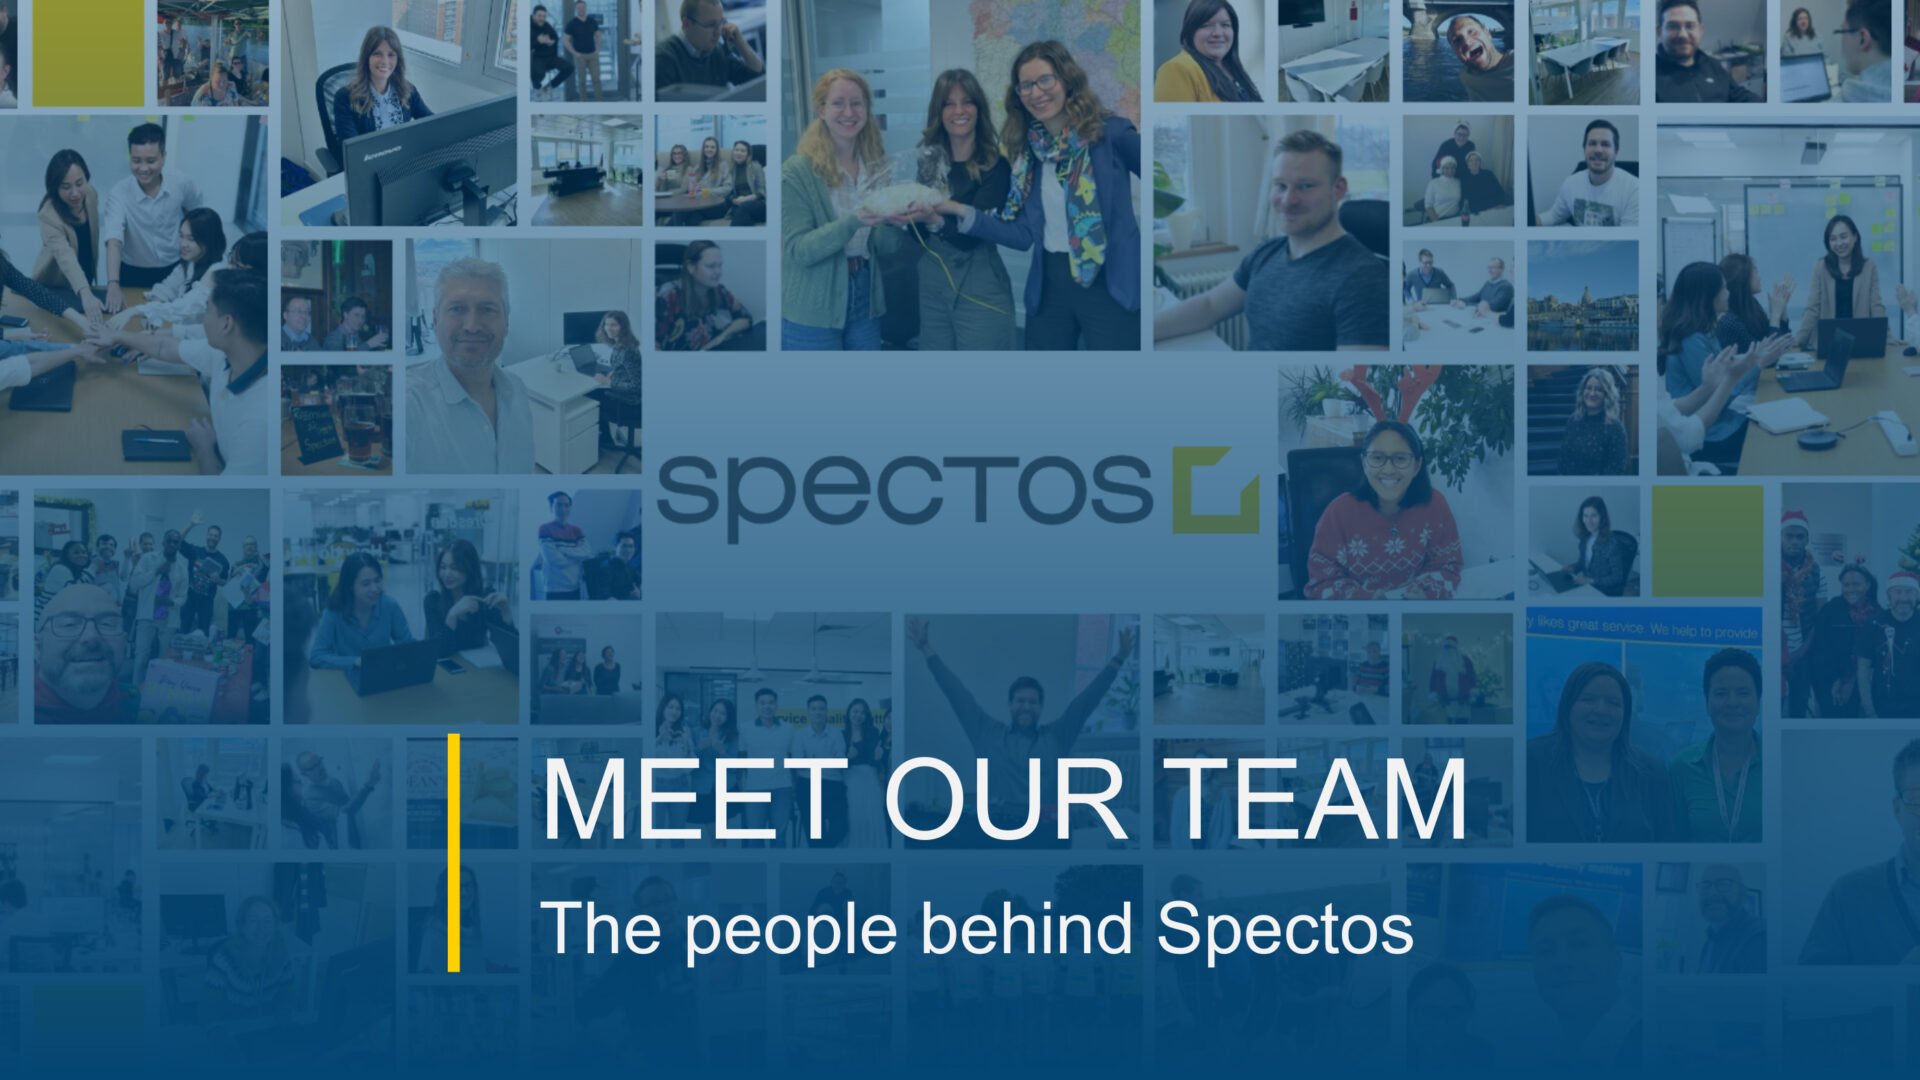 MEET OUR TEAM: The people behind Spectos